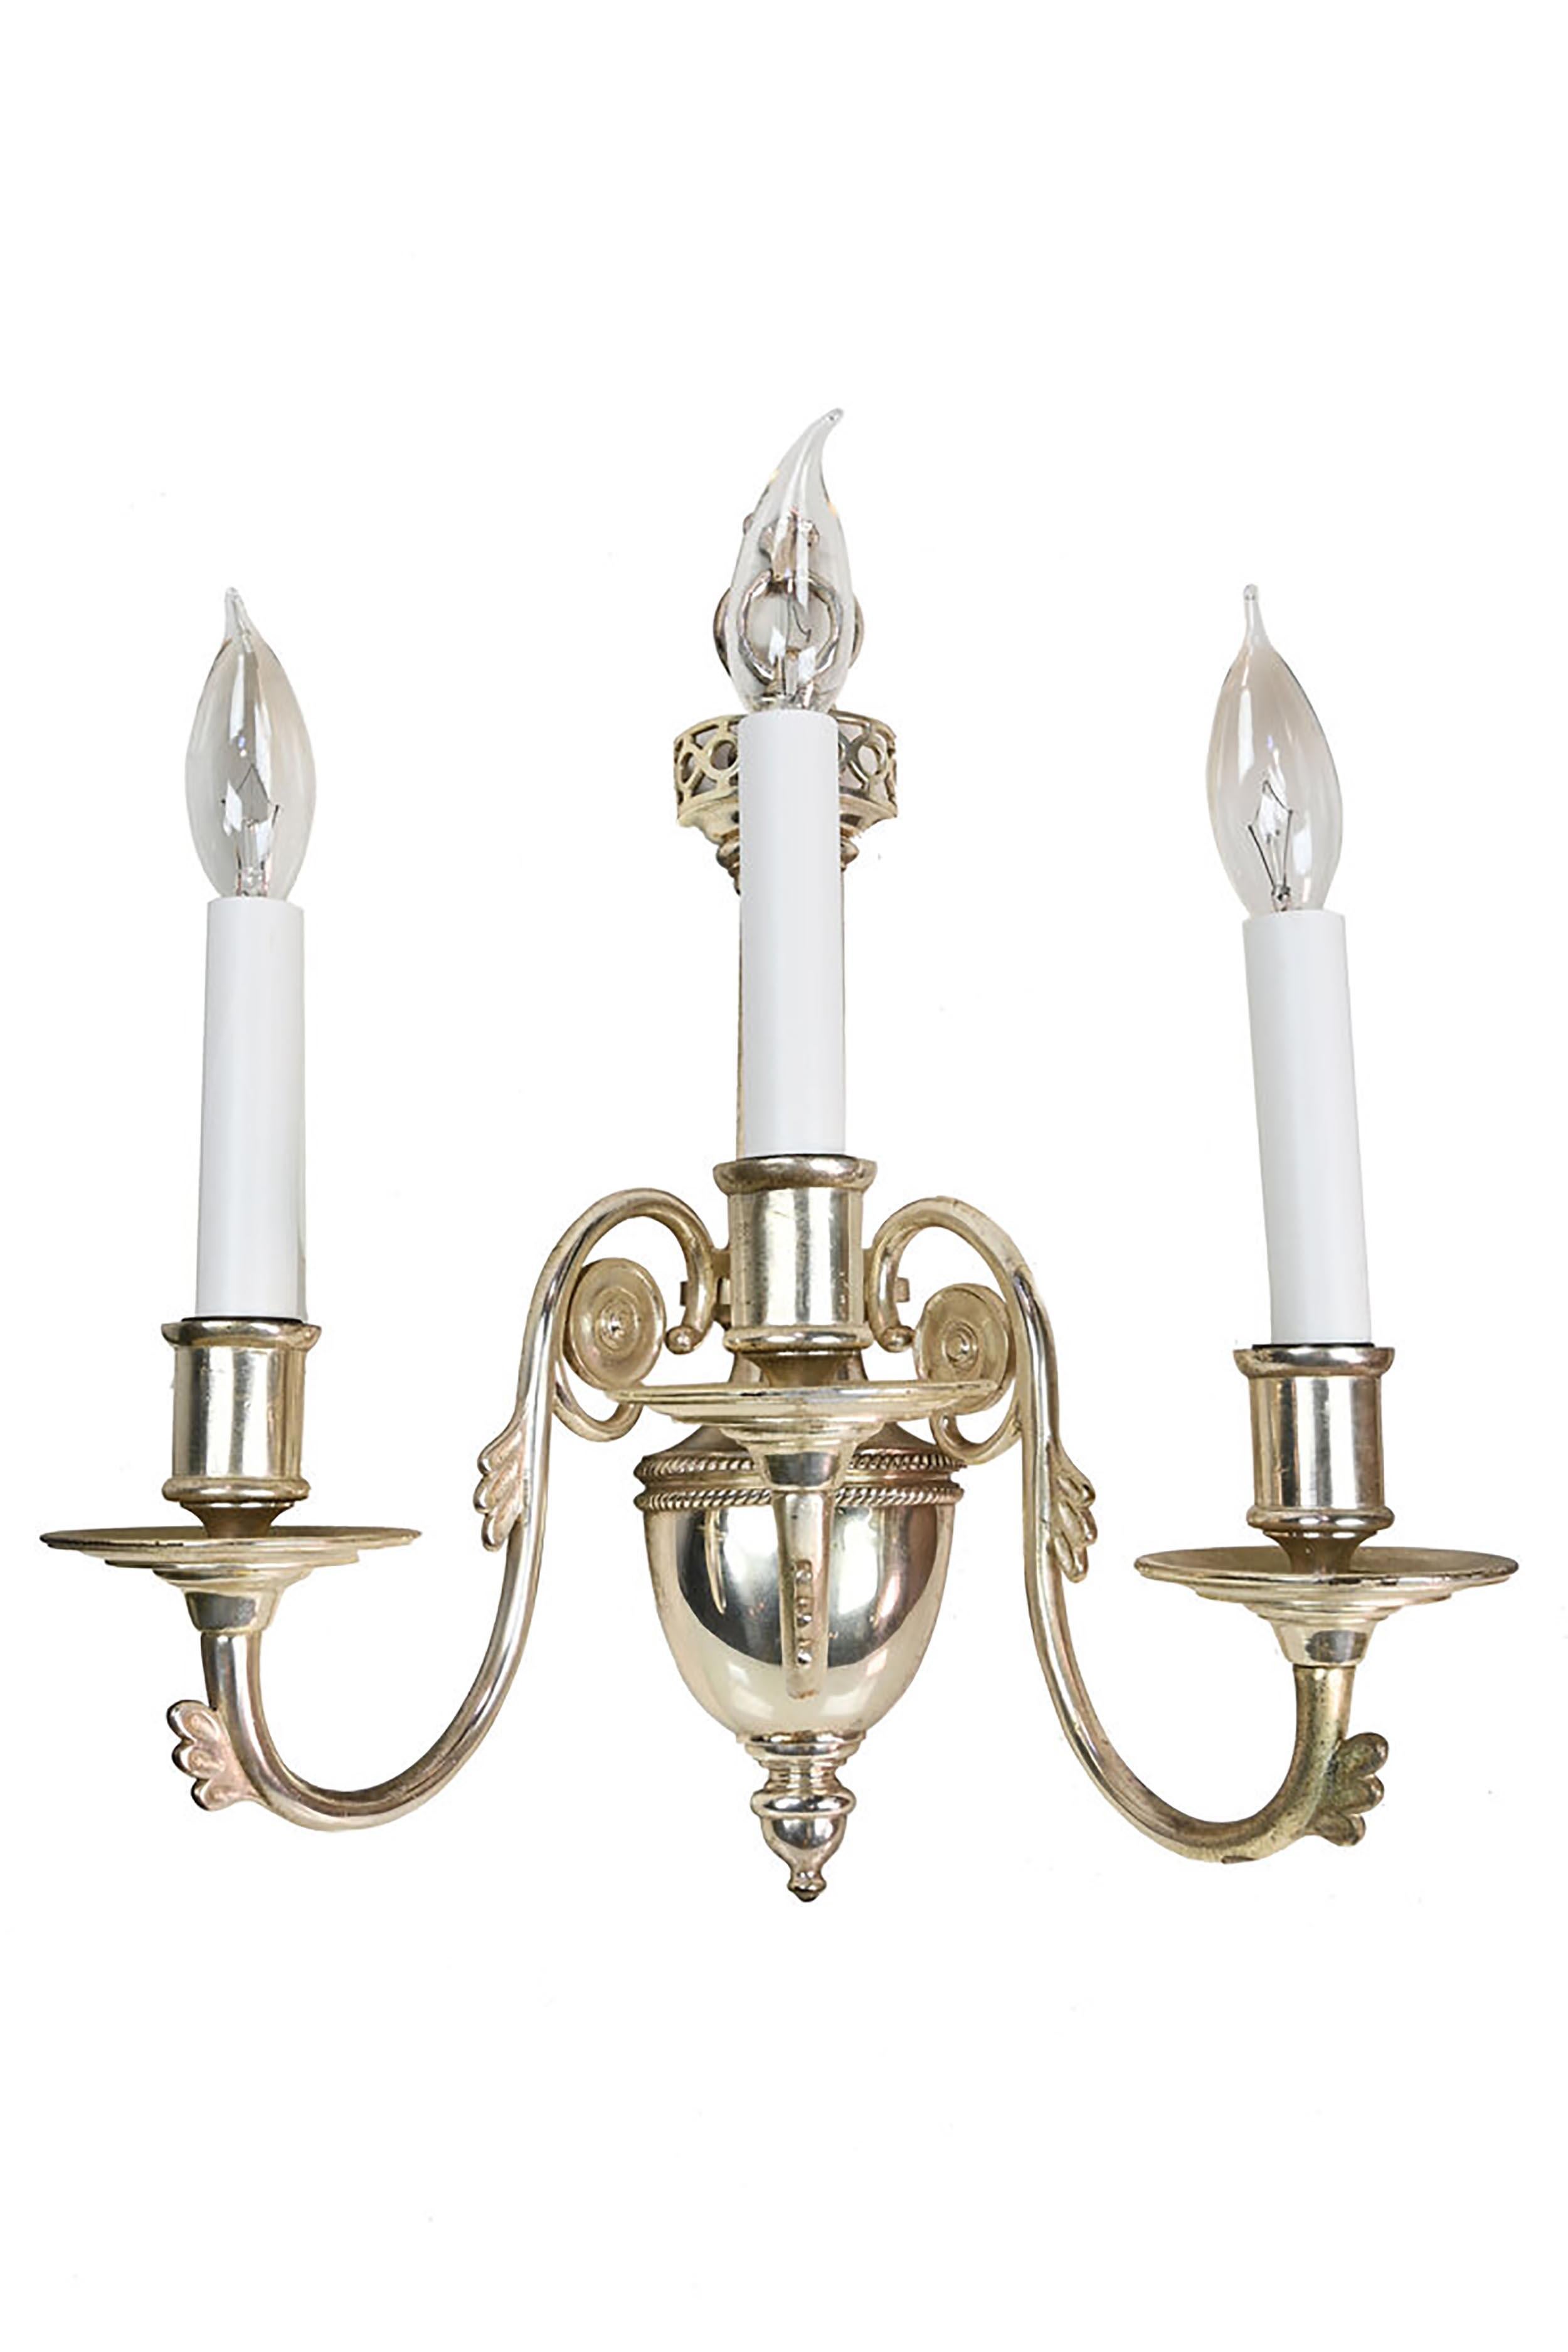 American Classical Caldwell Early 20th C. Silver 3 Candle Wall Sconces